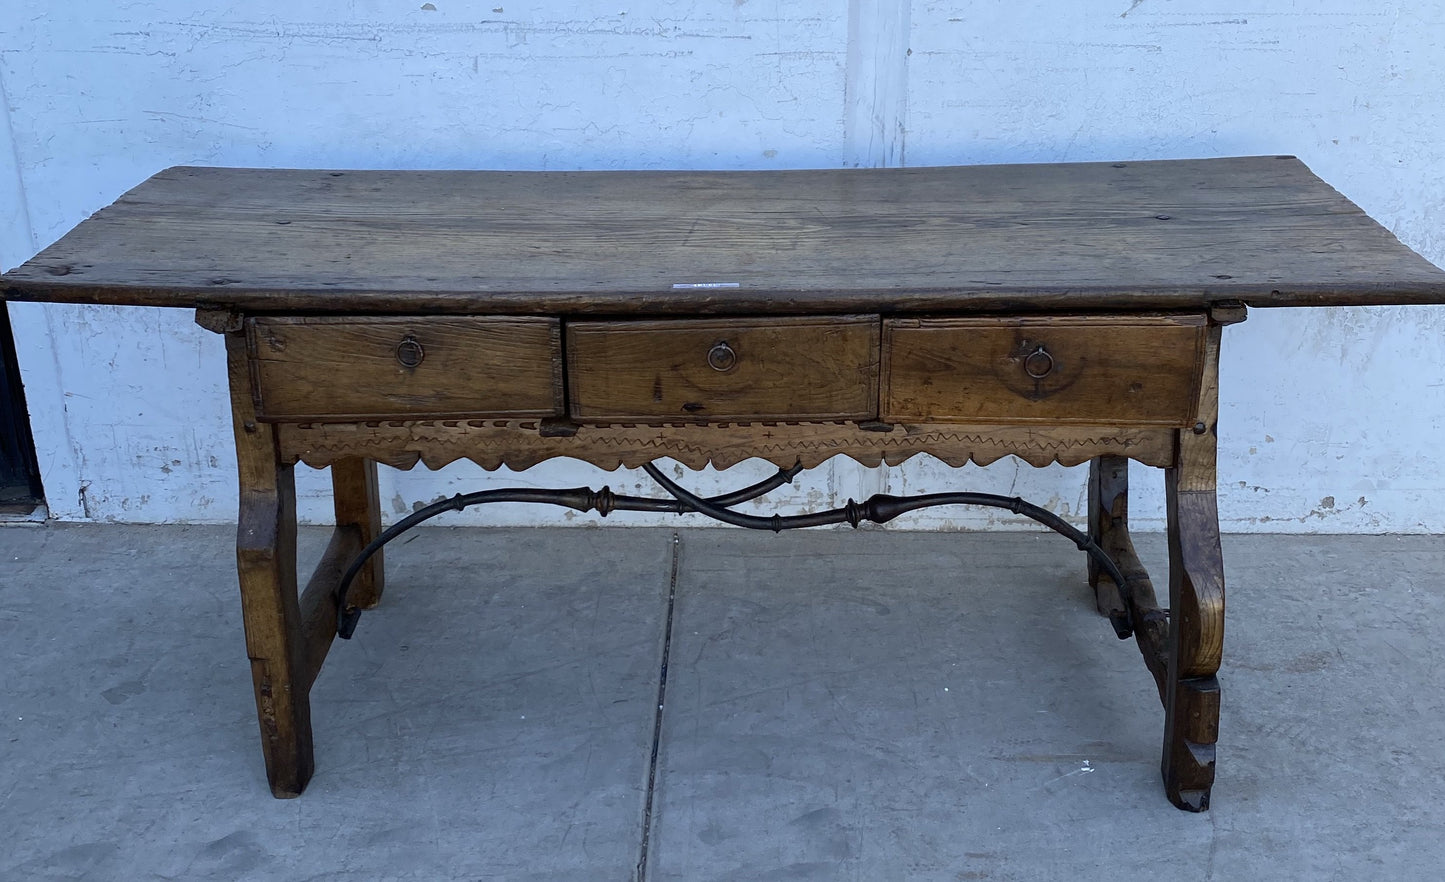 Chestnut Wood Antique Table / Desk with 3 Drawers